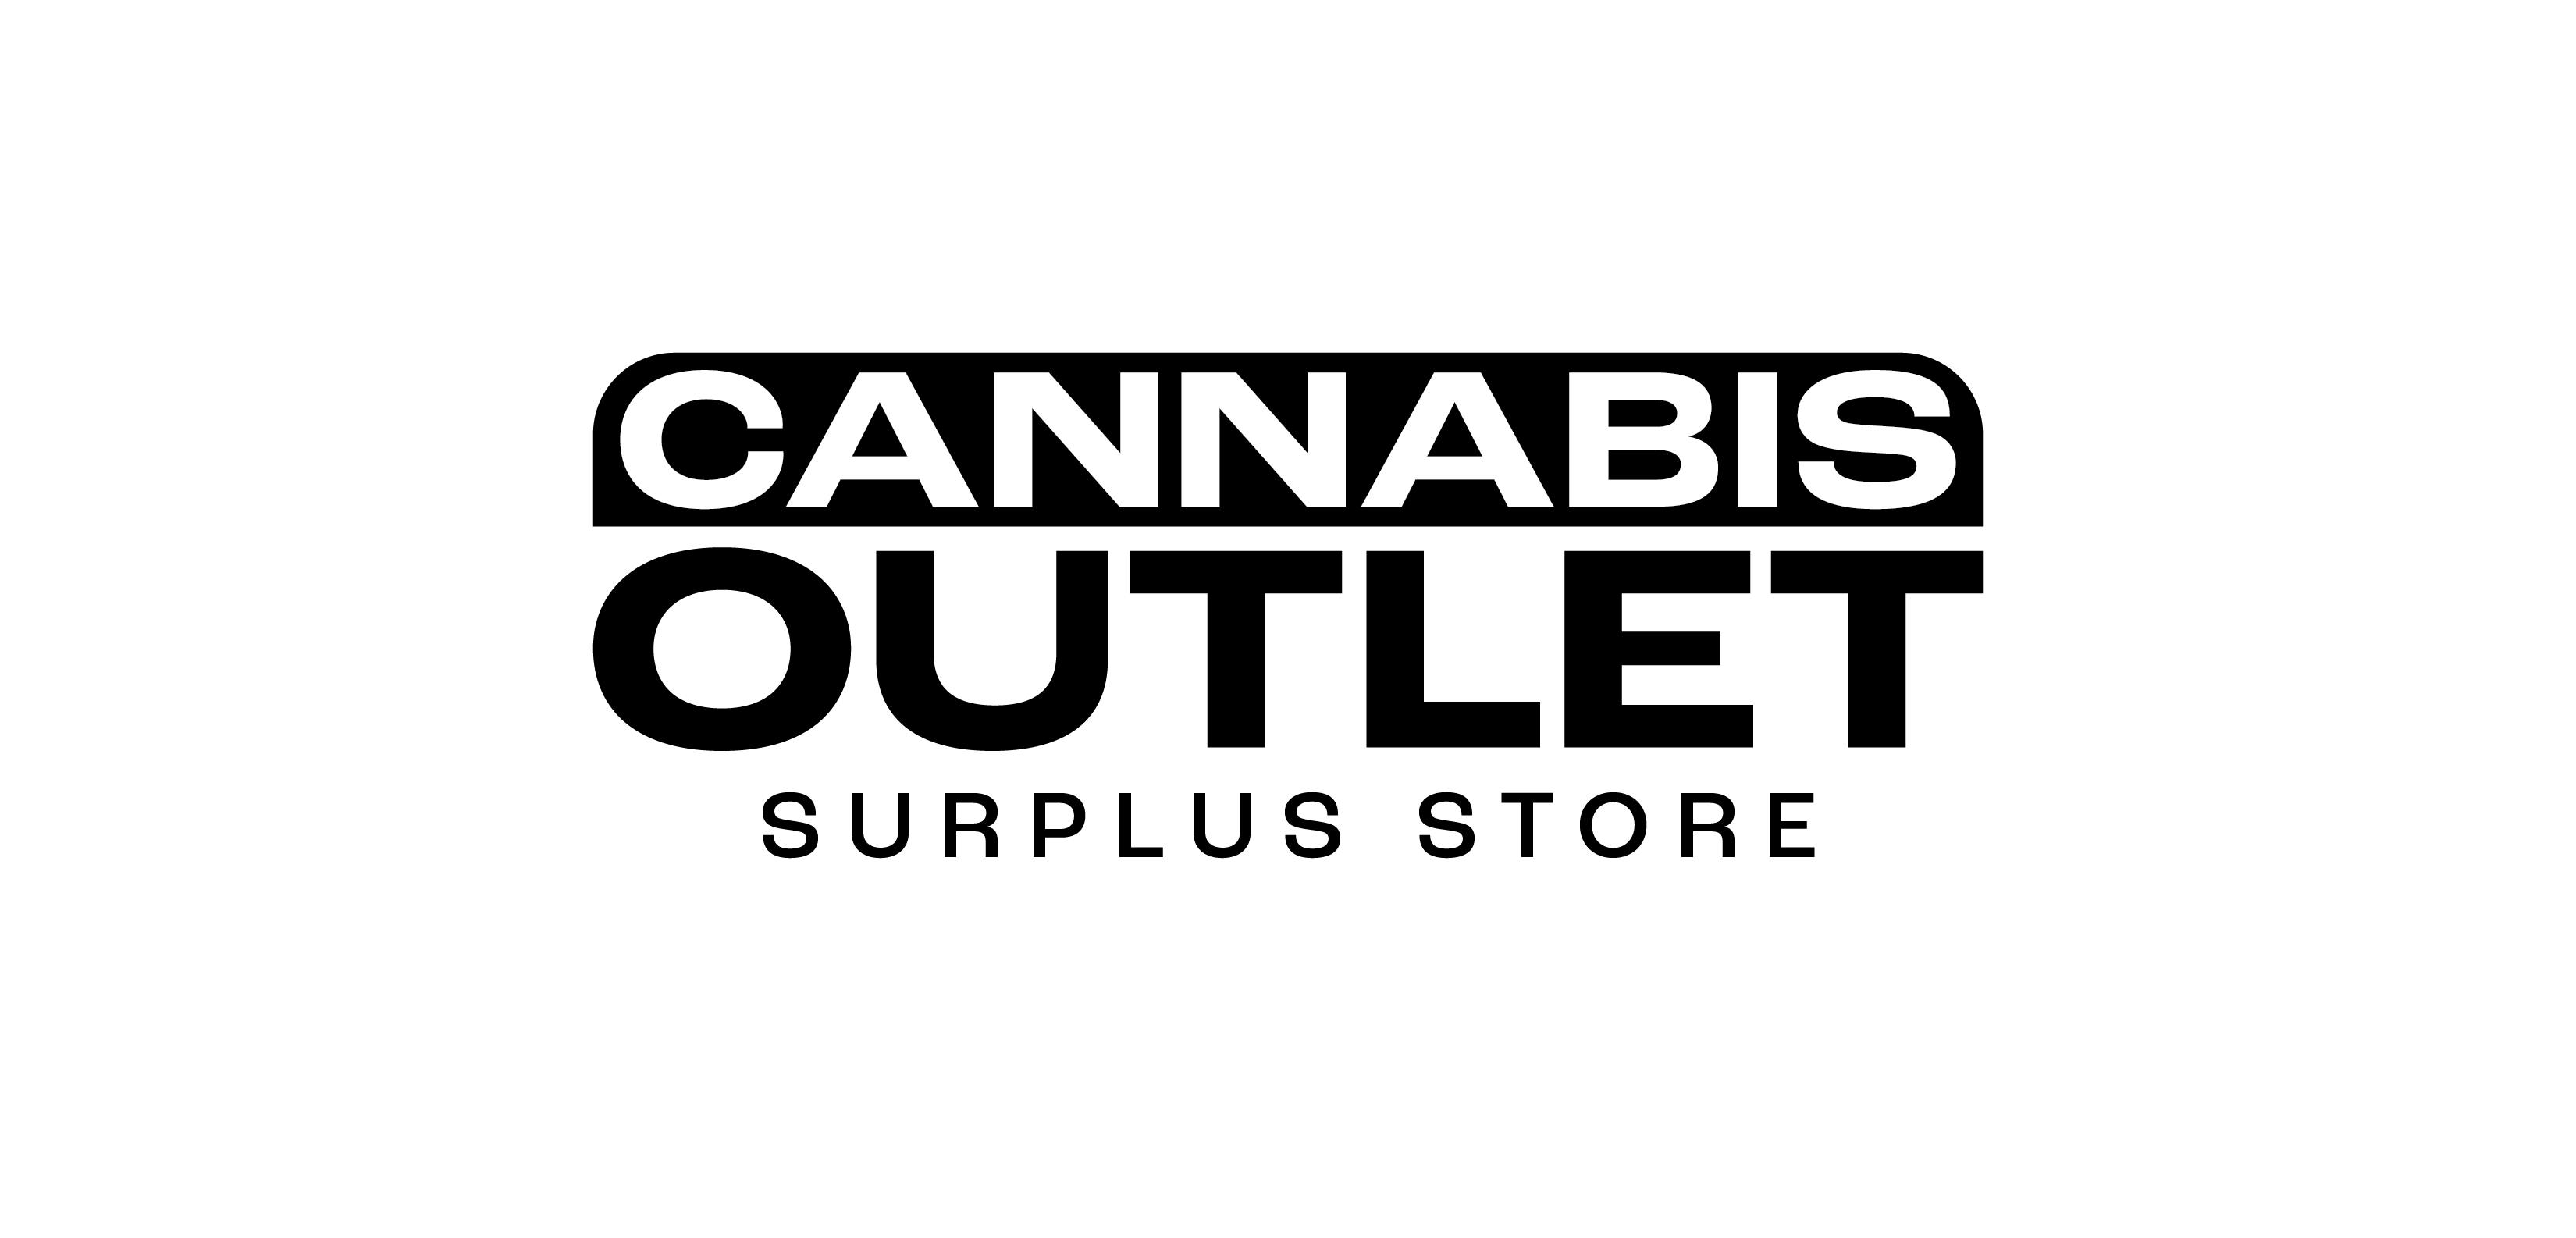 Cannabis Outlet